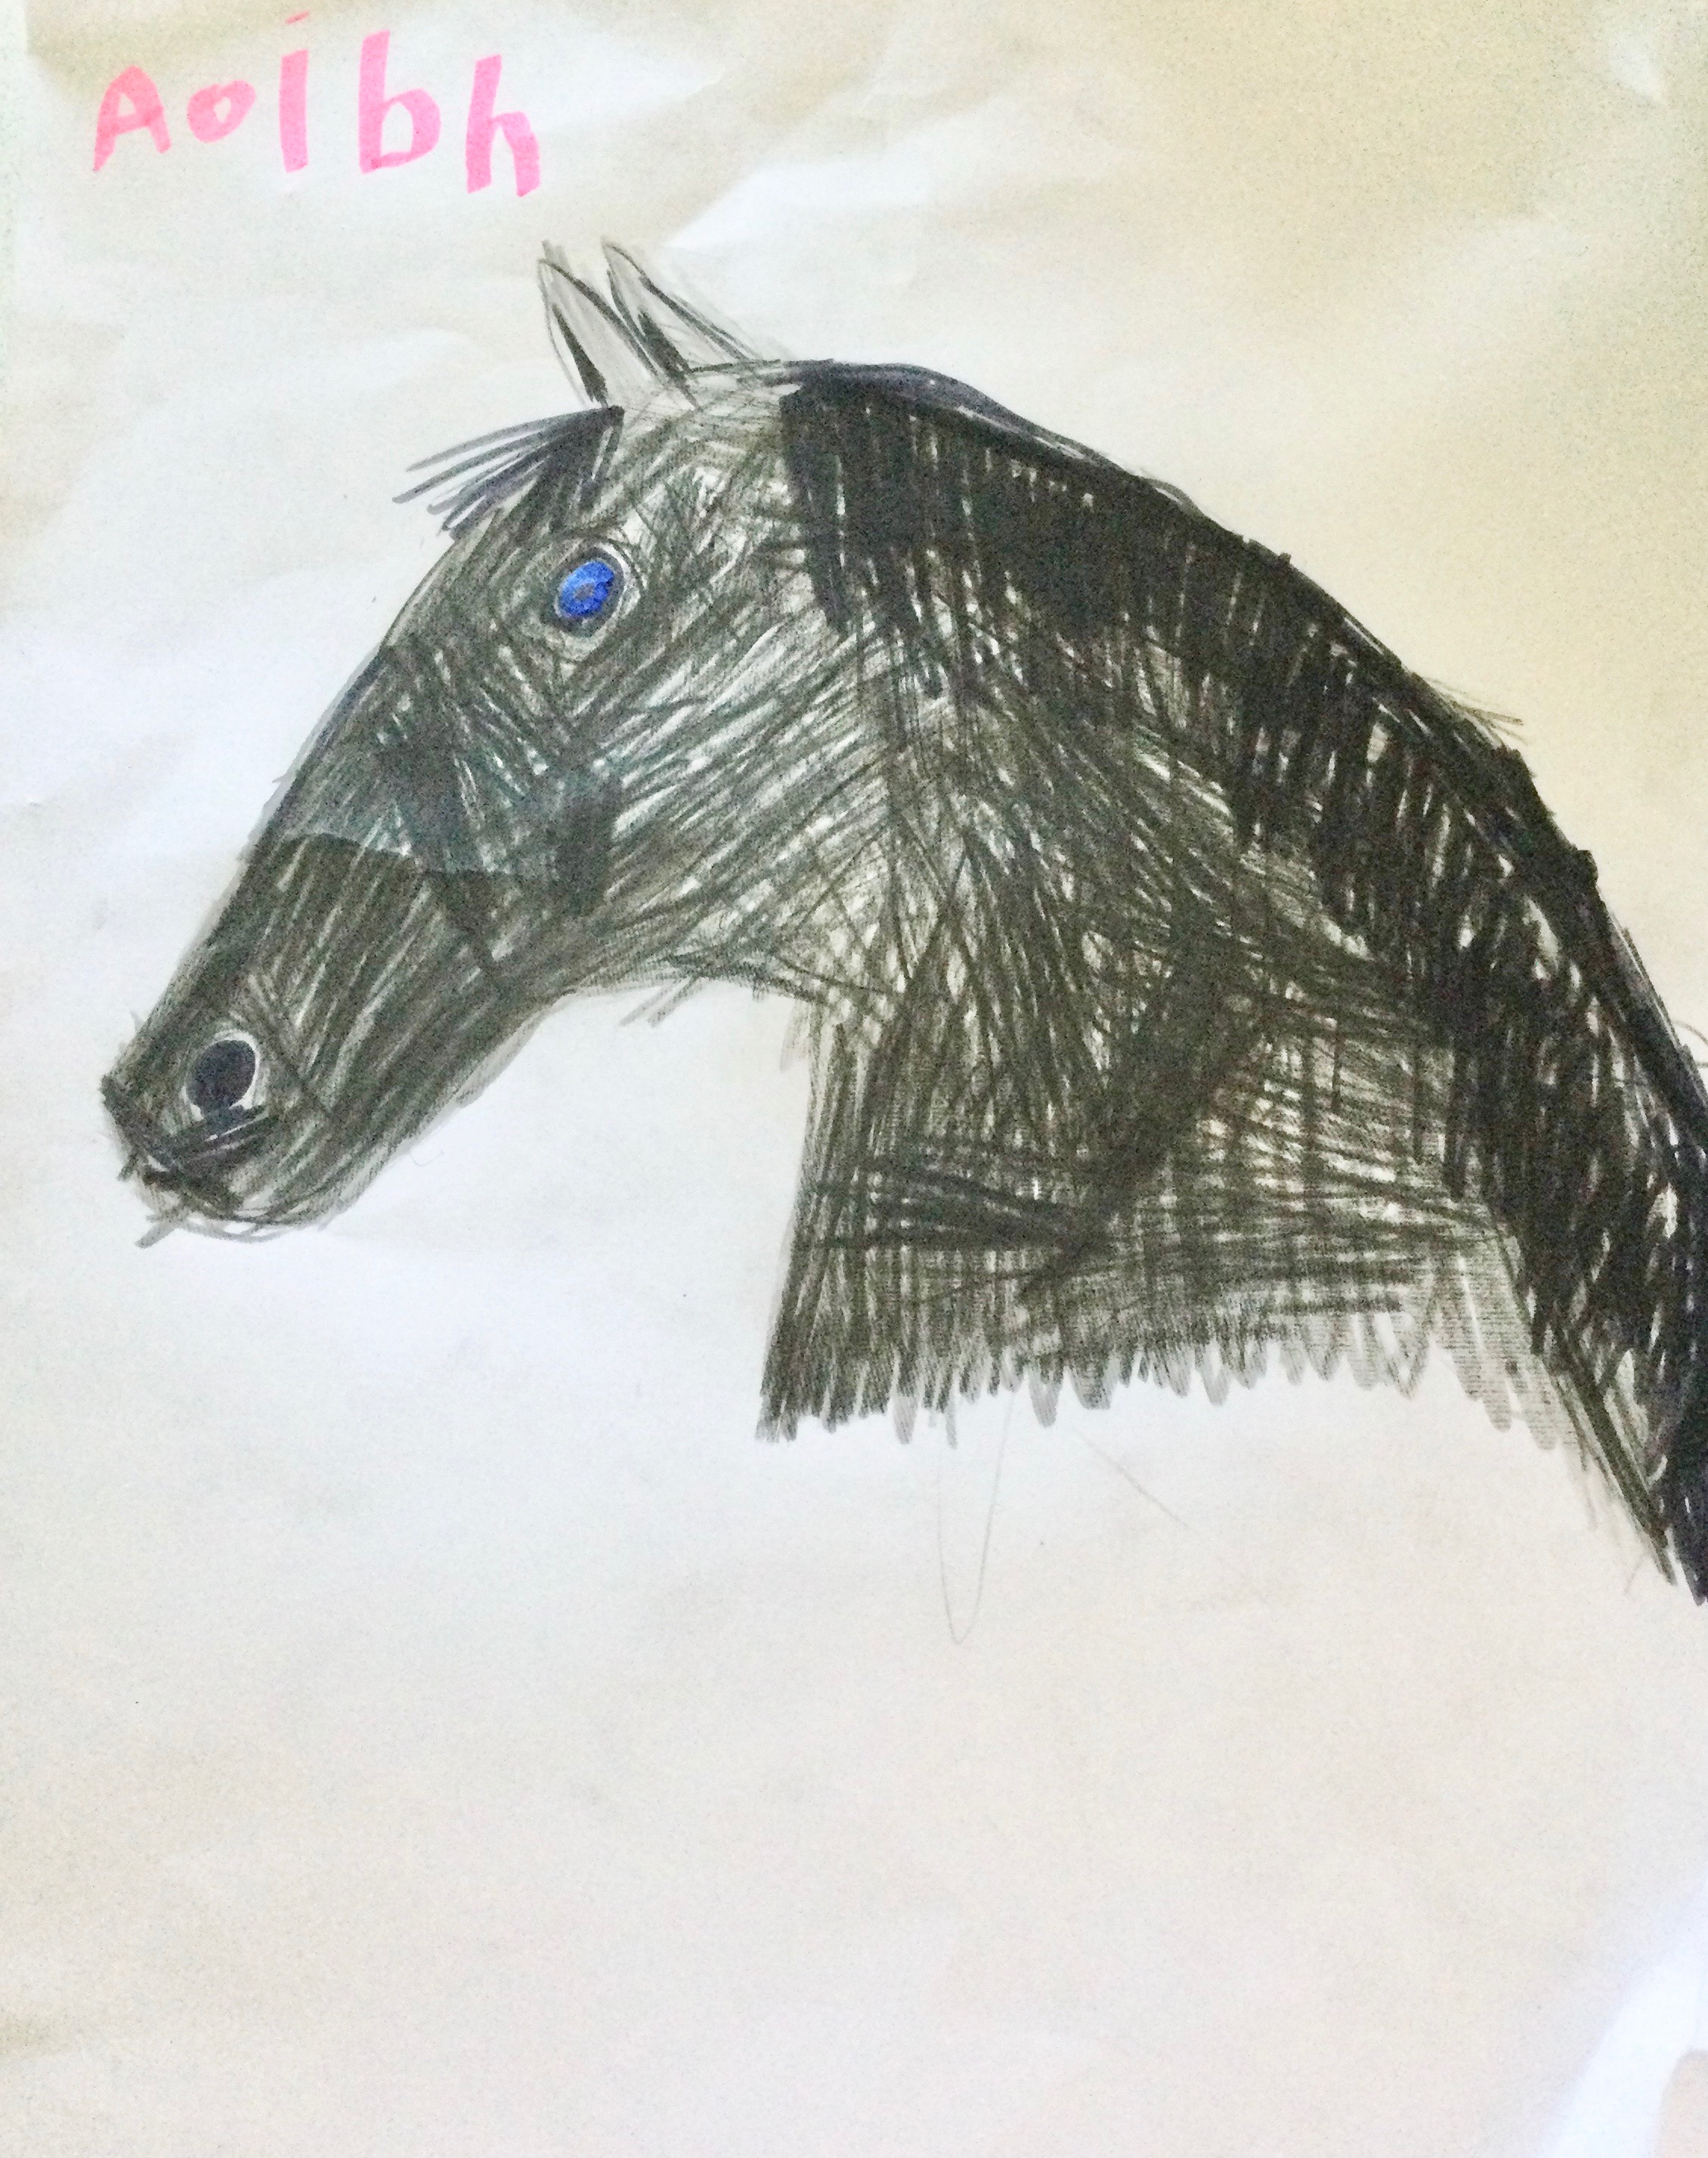 'My beautiful horse' by Aoibh (5) from Offaly